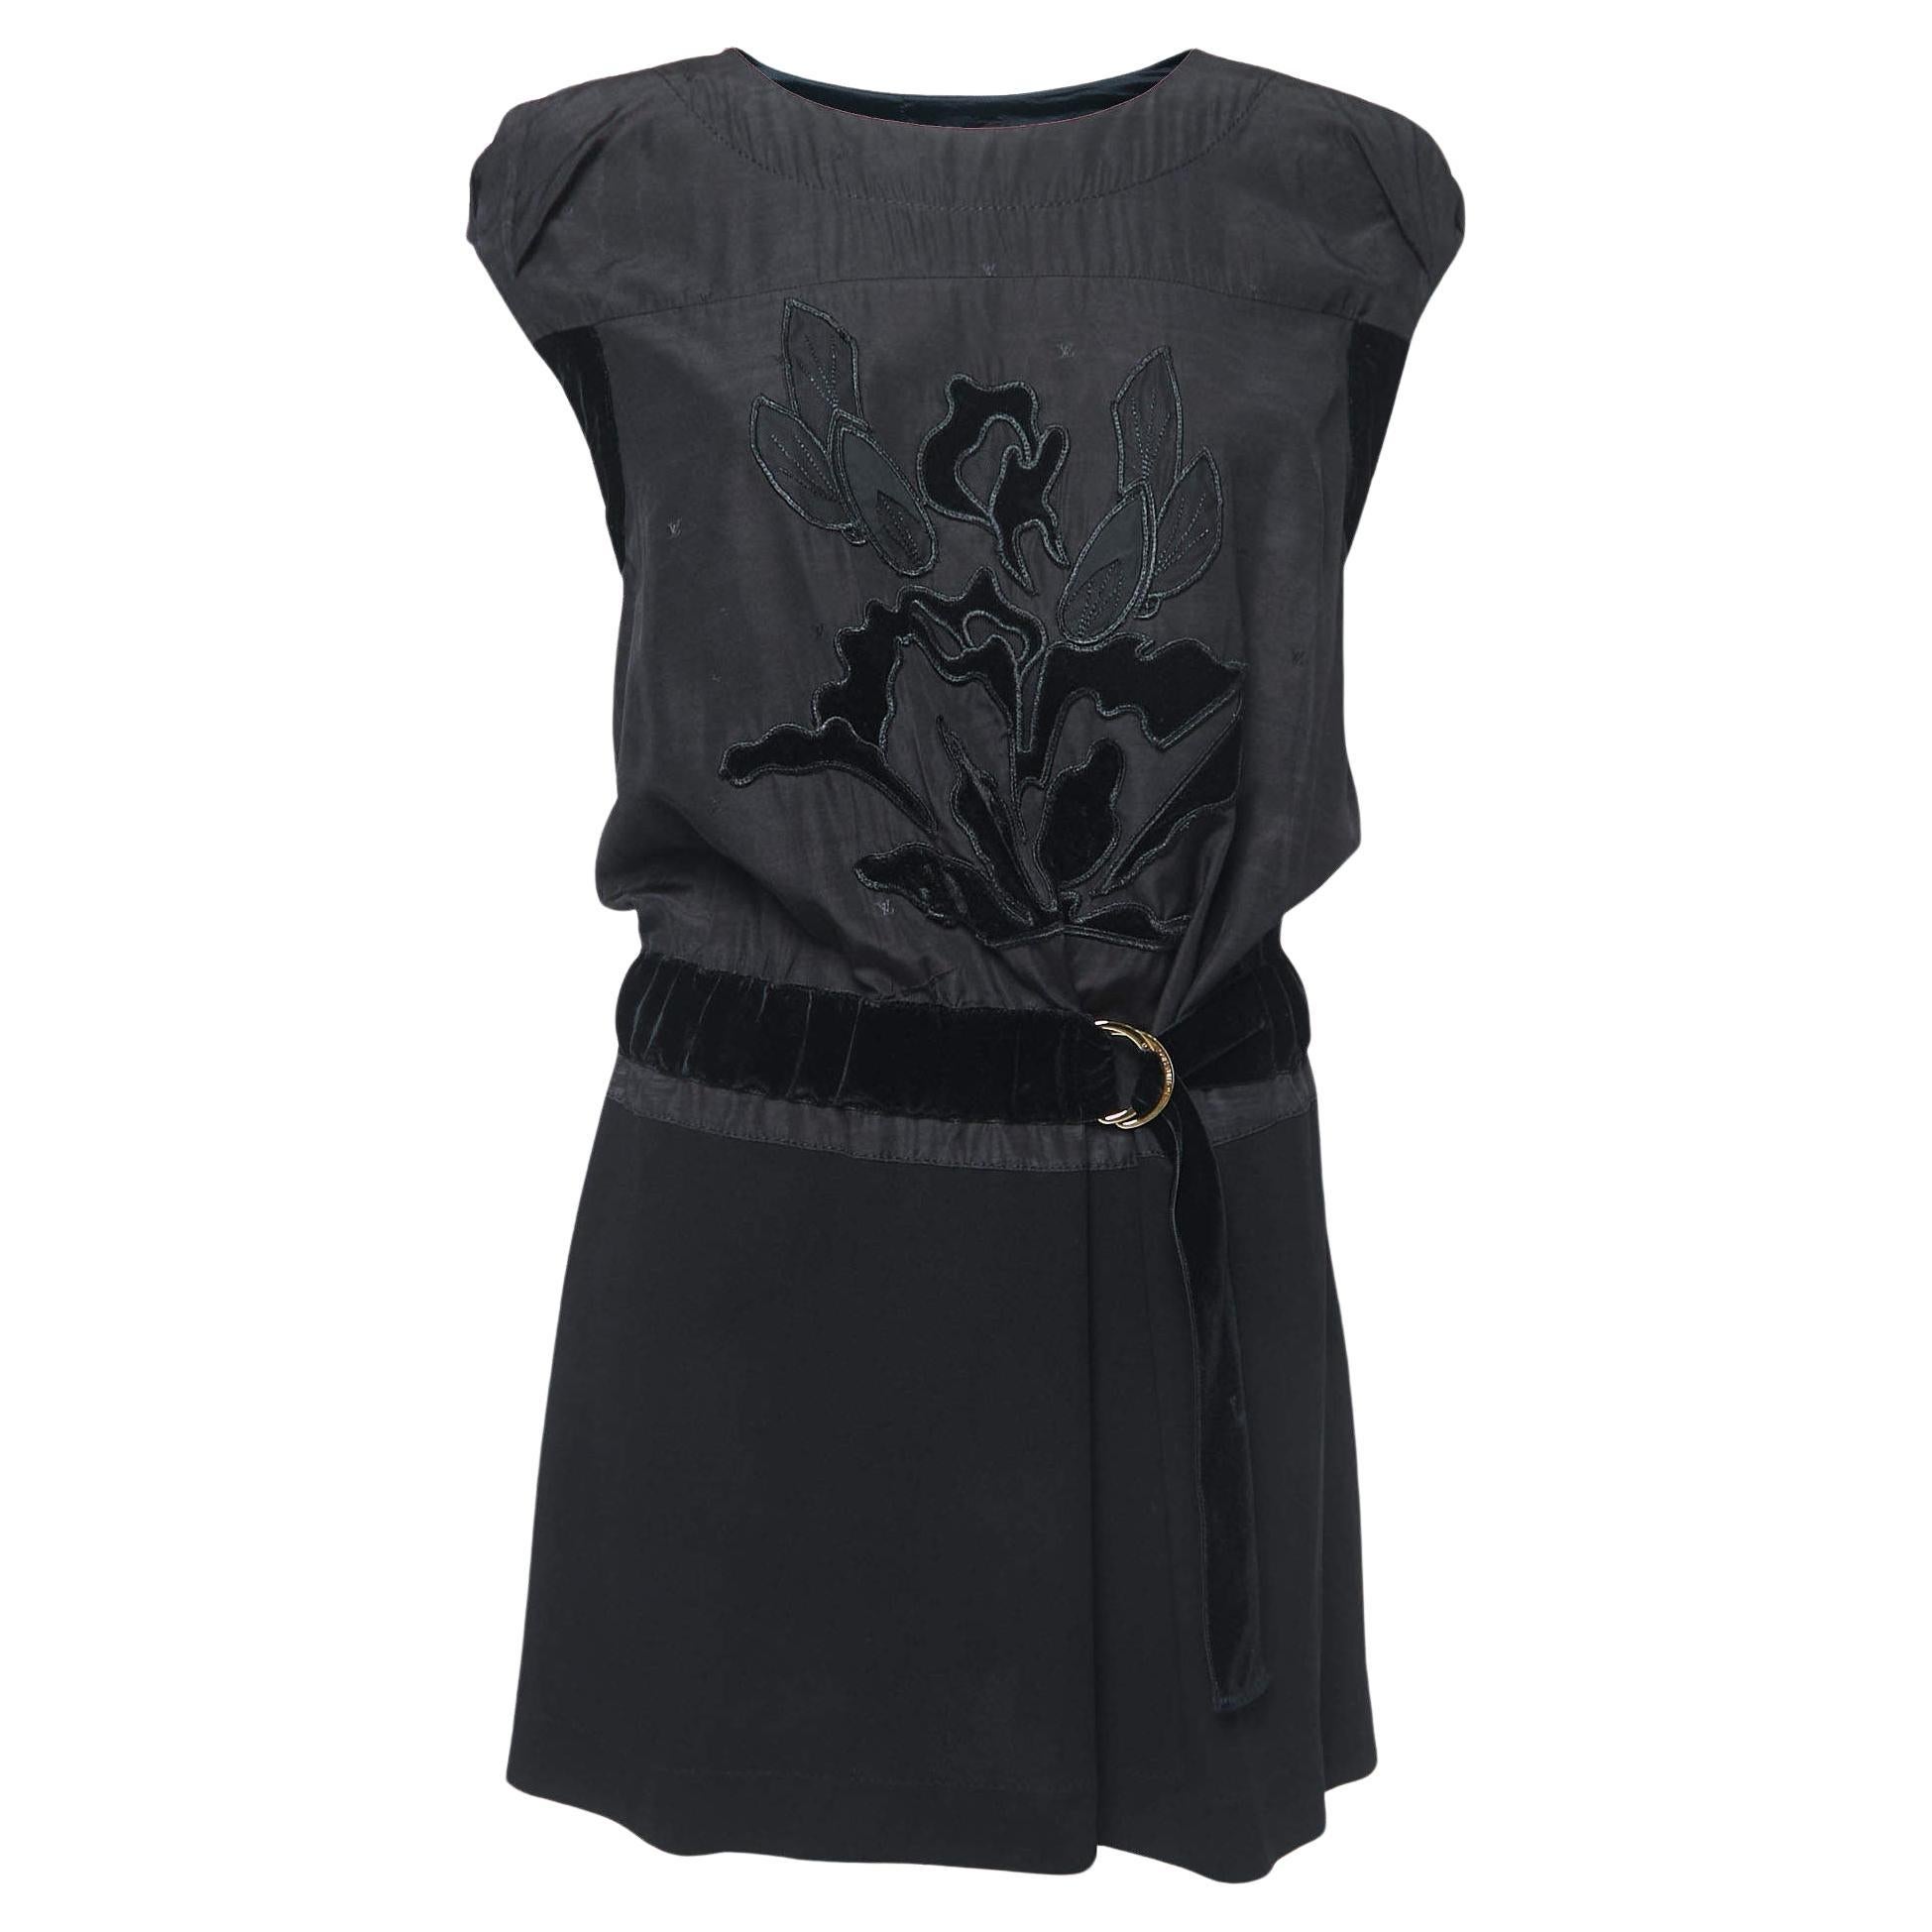 Louis Vuitton Black Embroidered Crepe Belted Mini Dress S